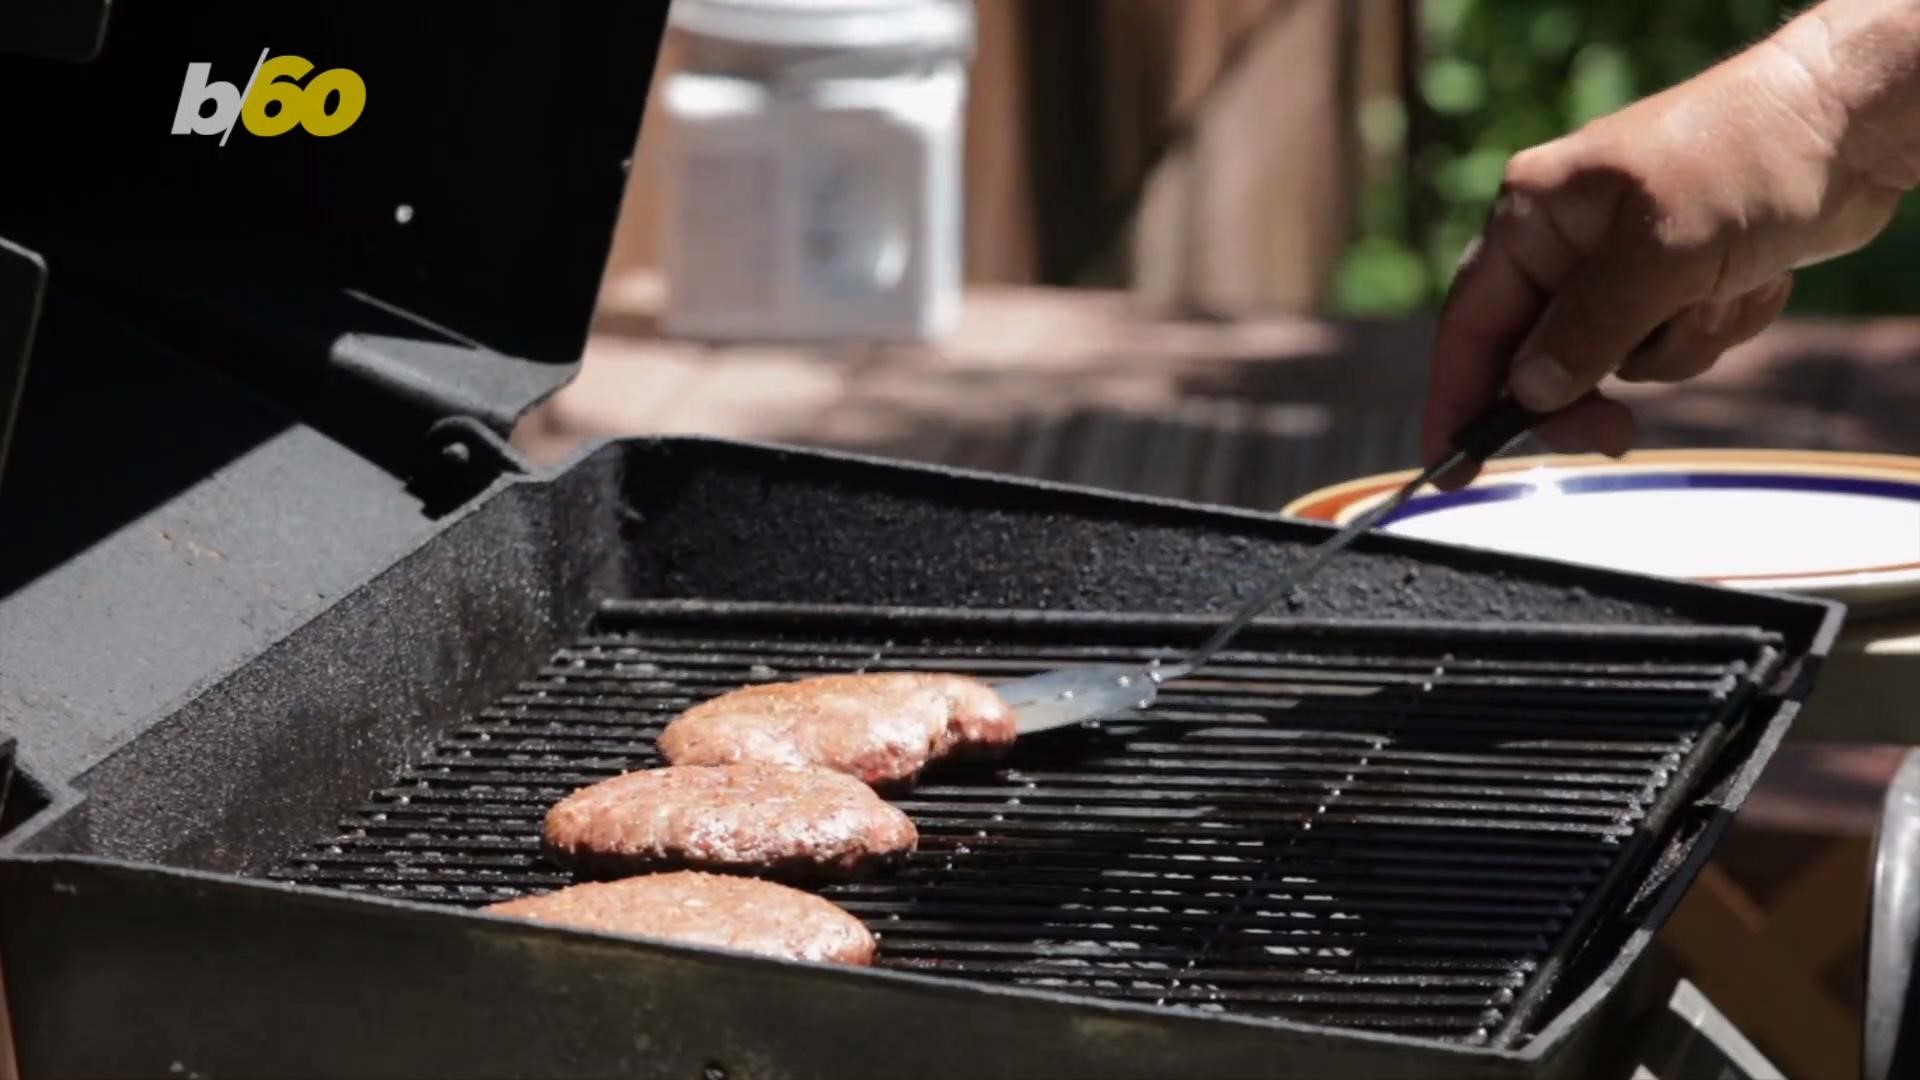 Here are 5 of the biggest mistakes people make when grilling burgers, according to the experts. Buzz60's Sean Dowling has more.